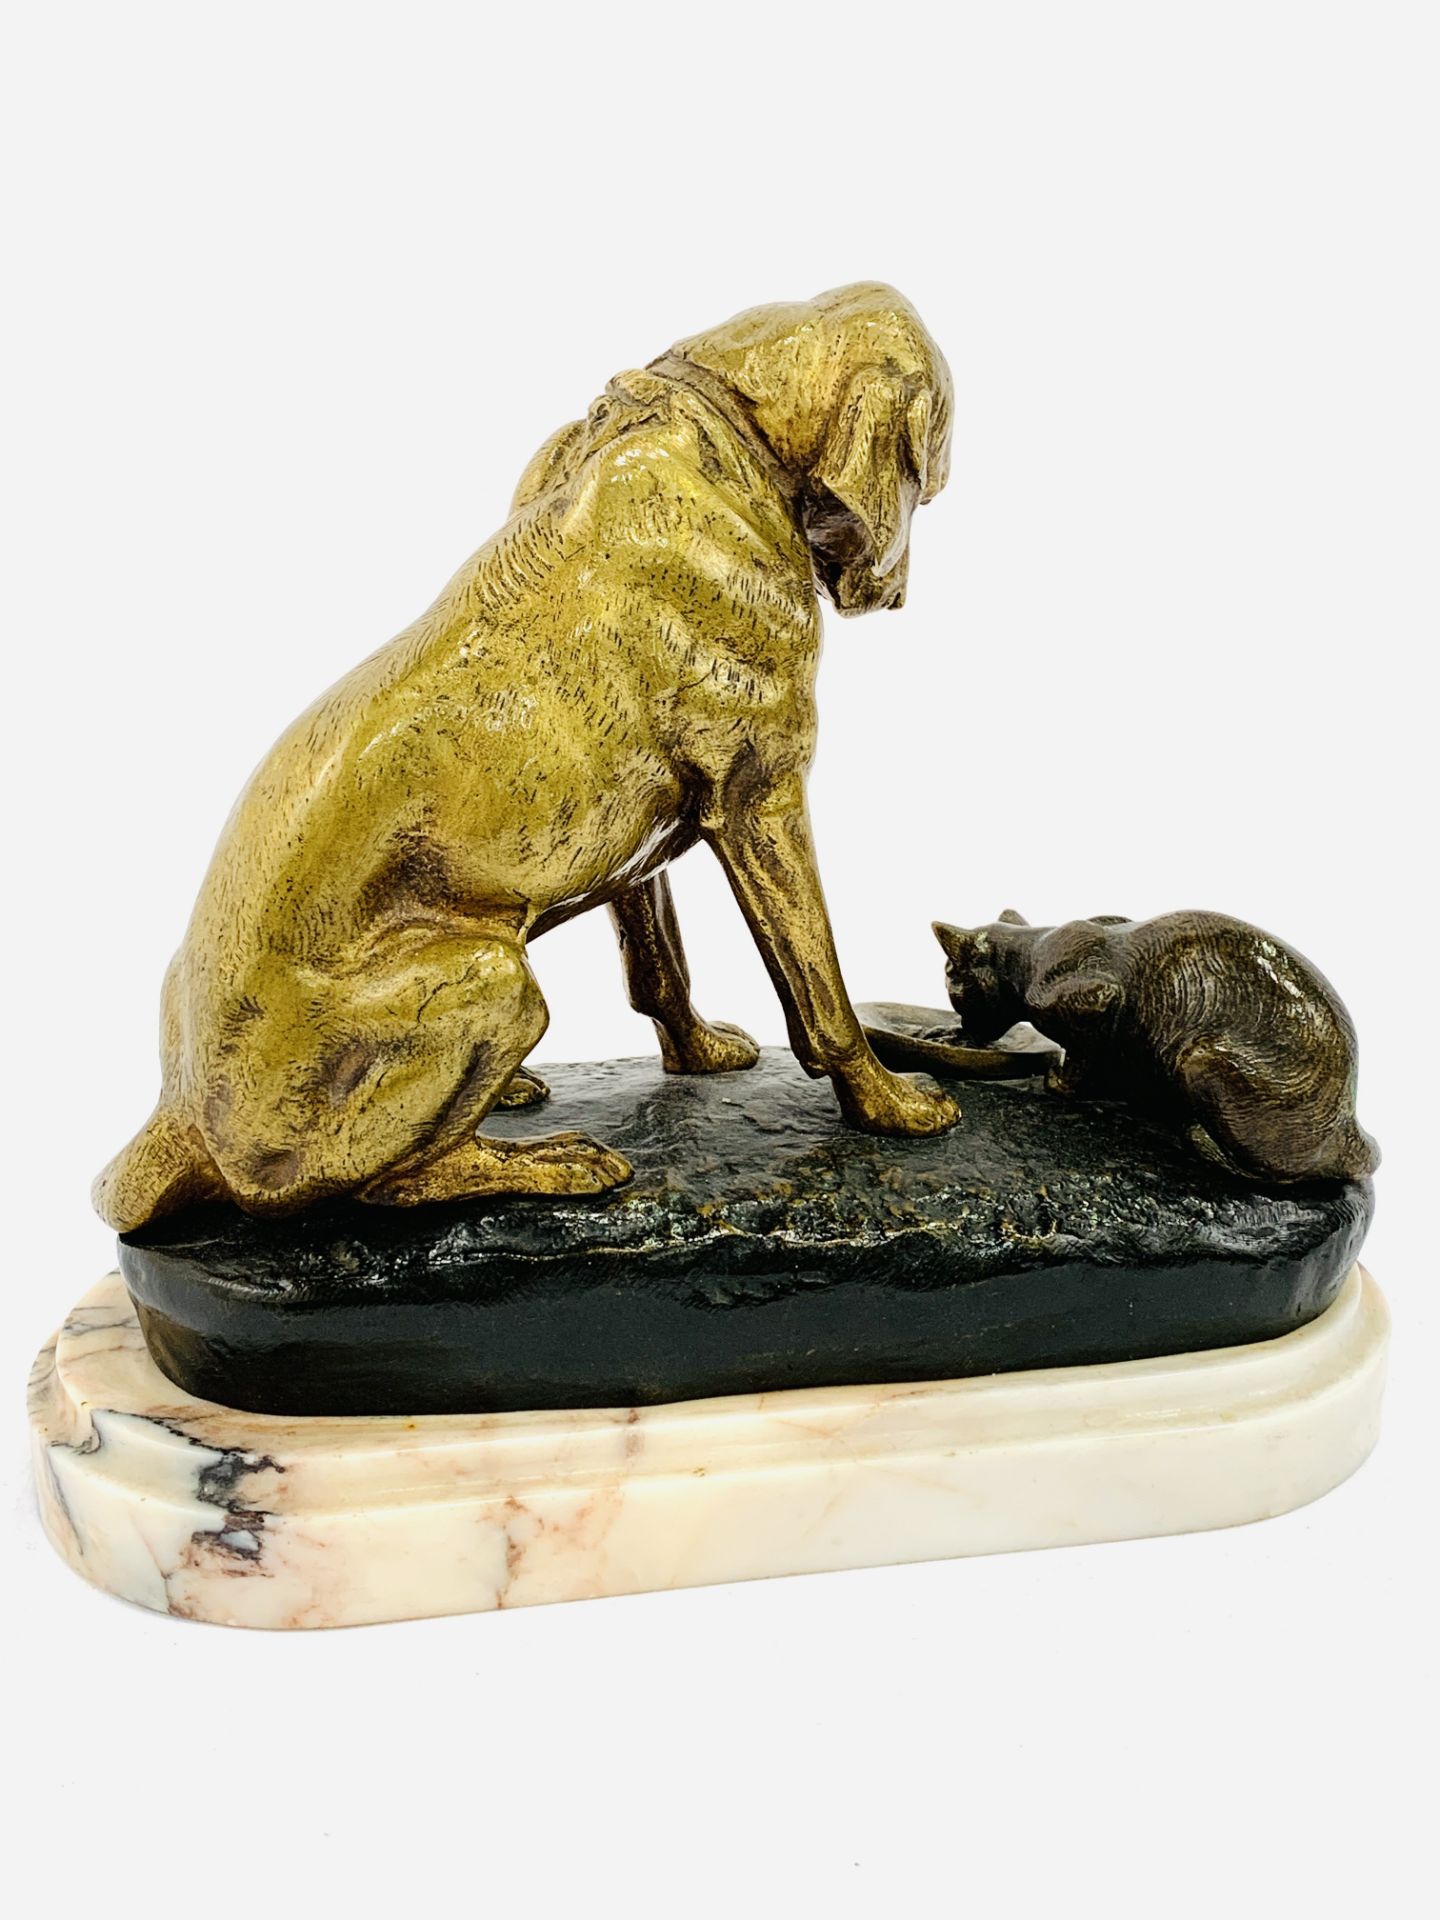 Brass/bronze figure of a dog sitting over a cat eating from a dish, signed A de Gericke - Image 4 of 5